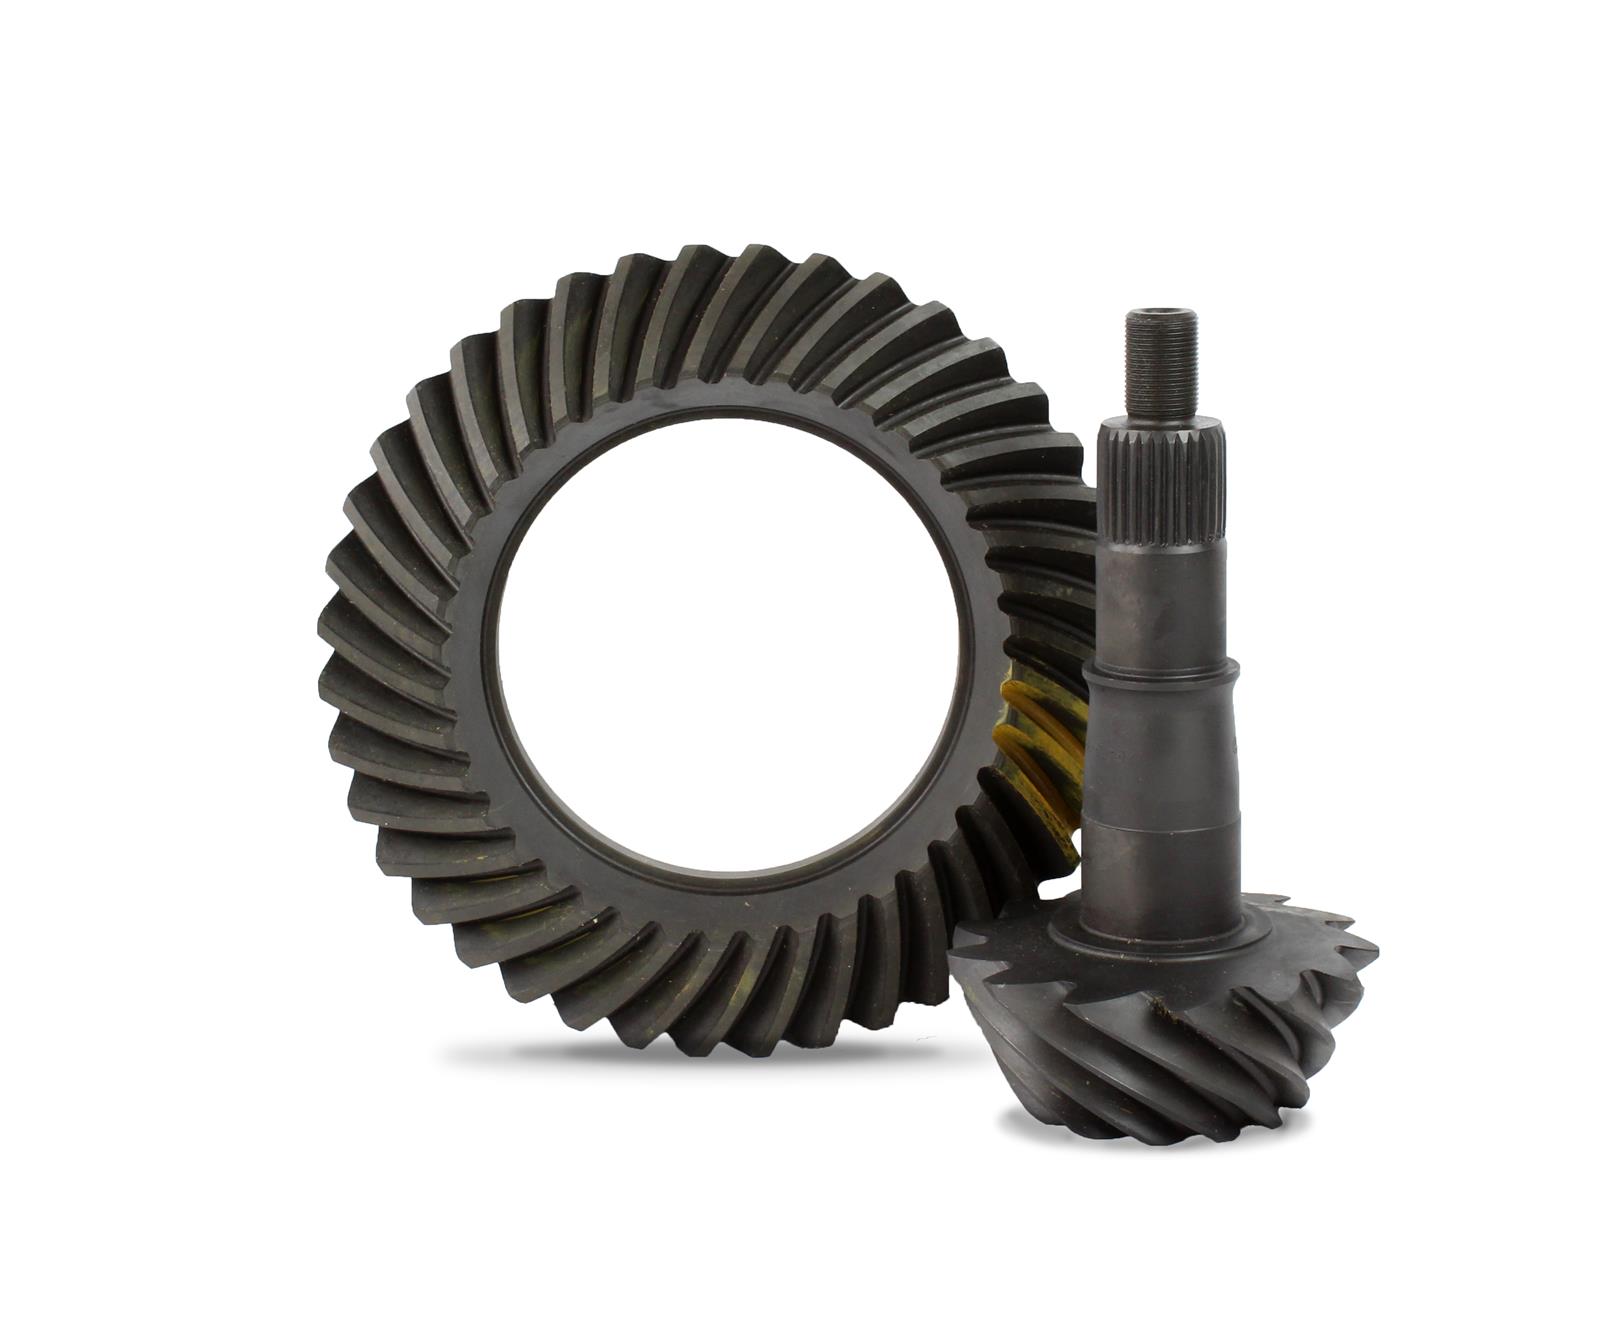 US Gear 07-888308 US Gear Ring and Pinion Gear Sets | Summit